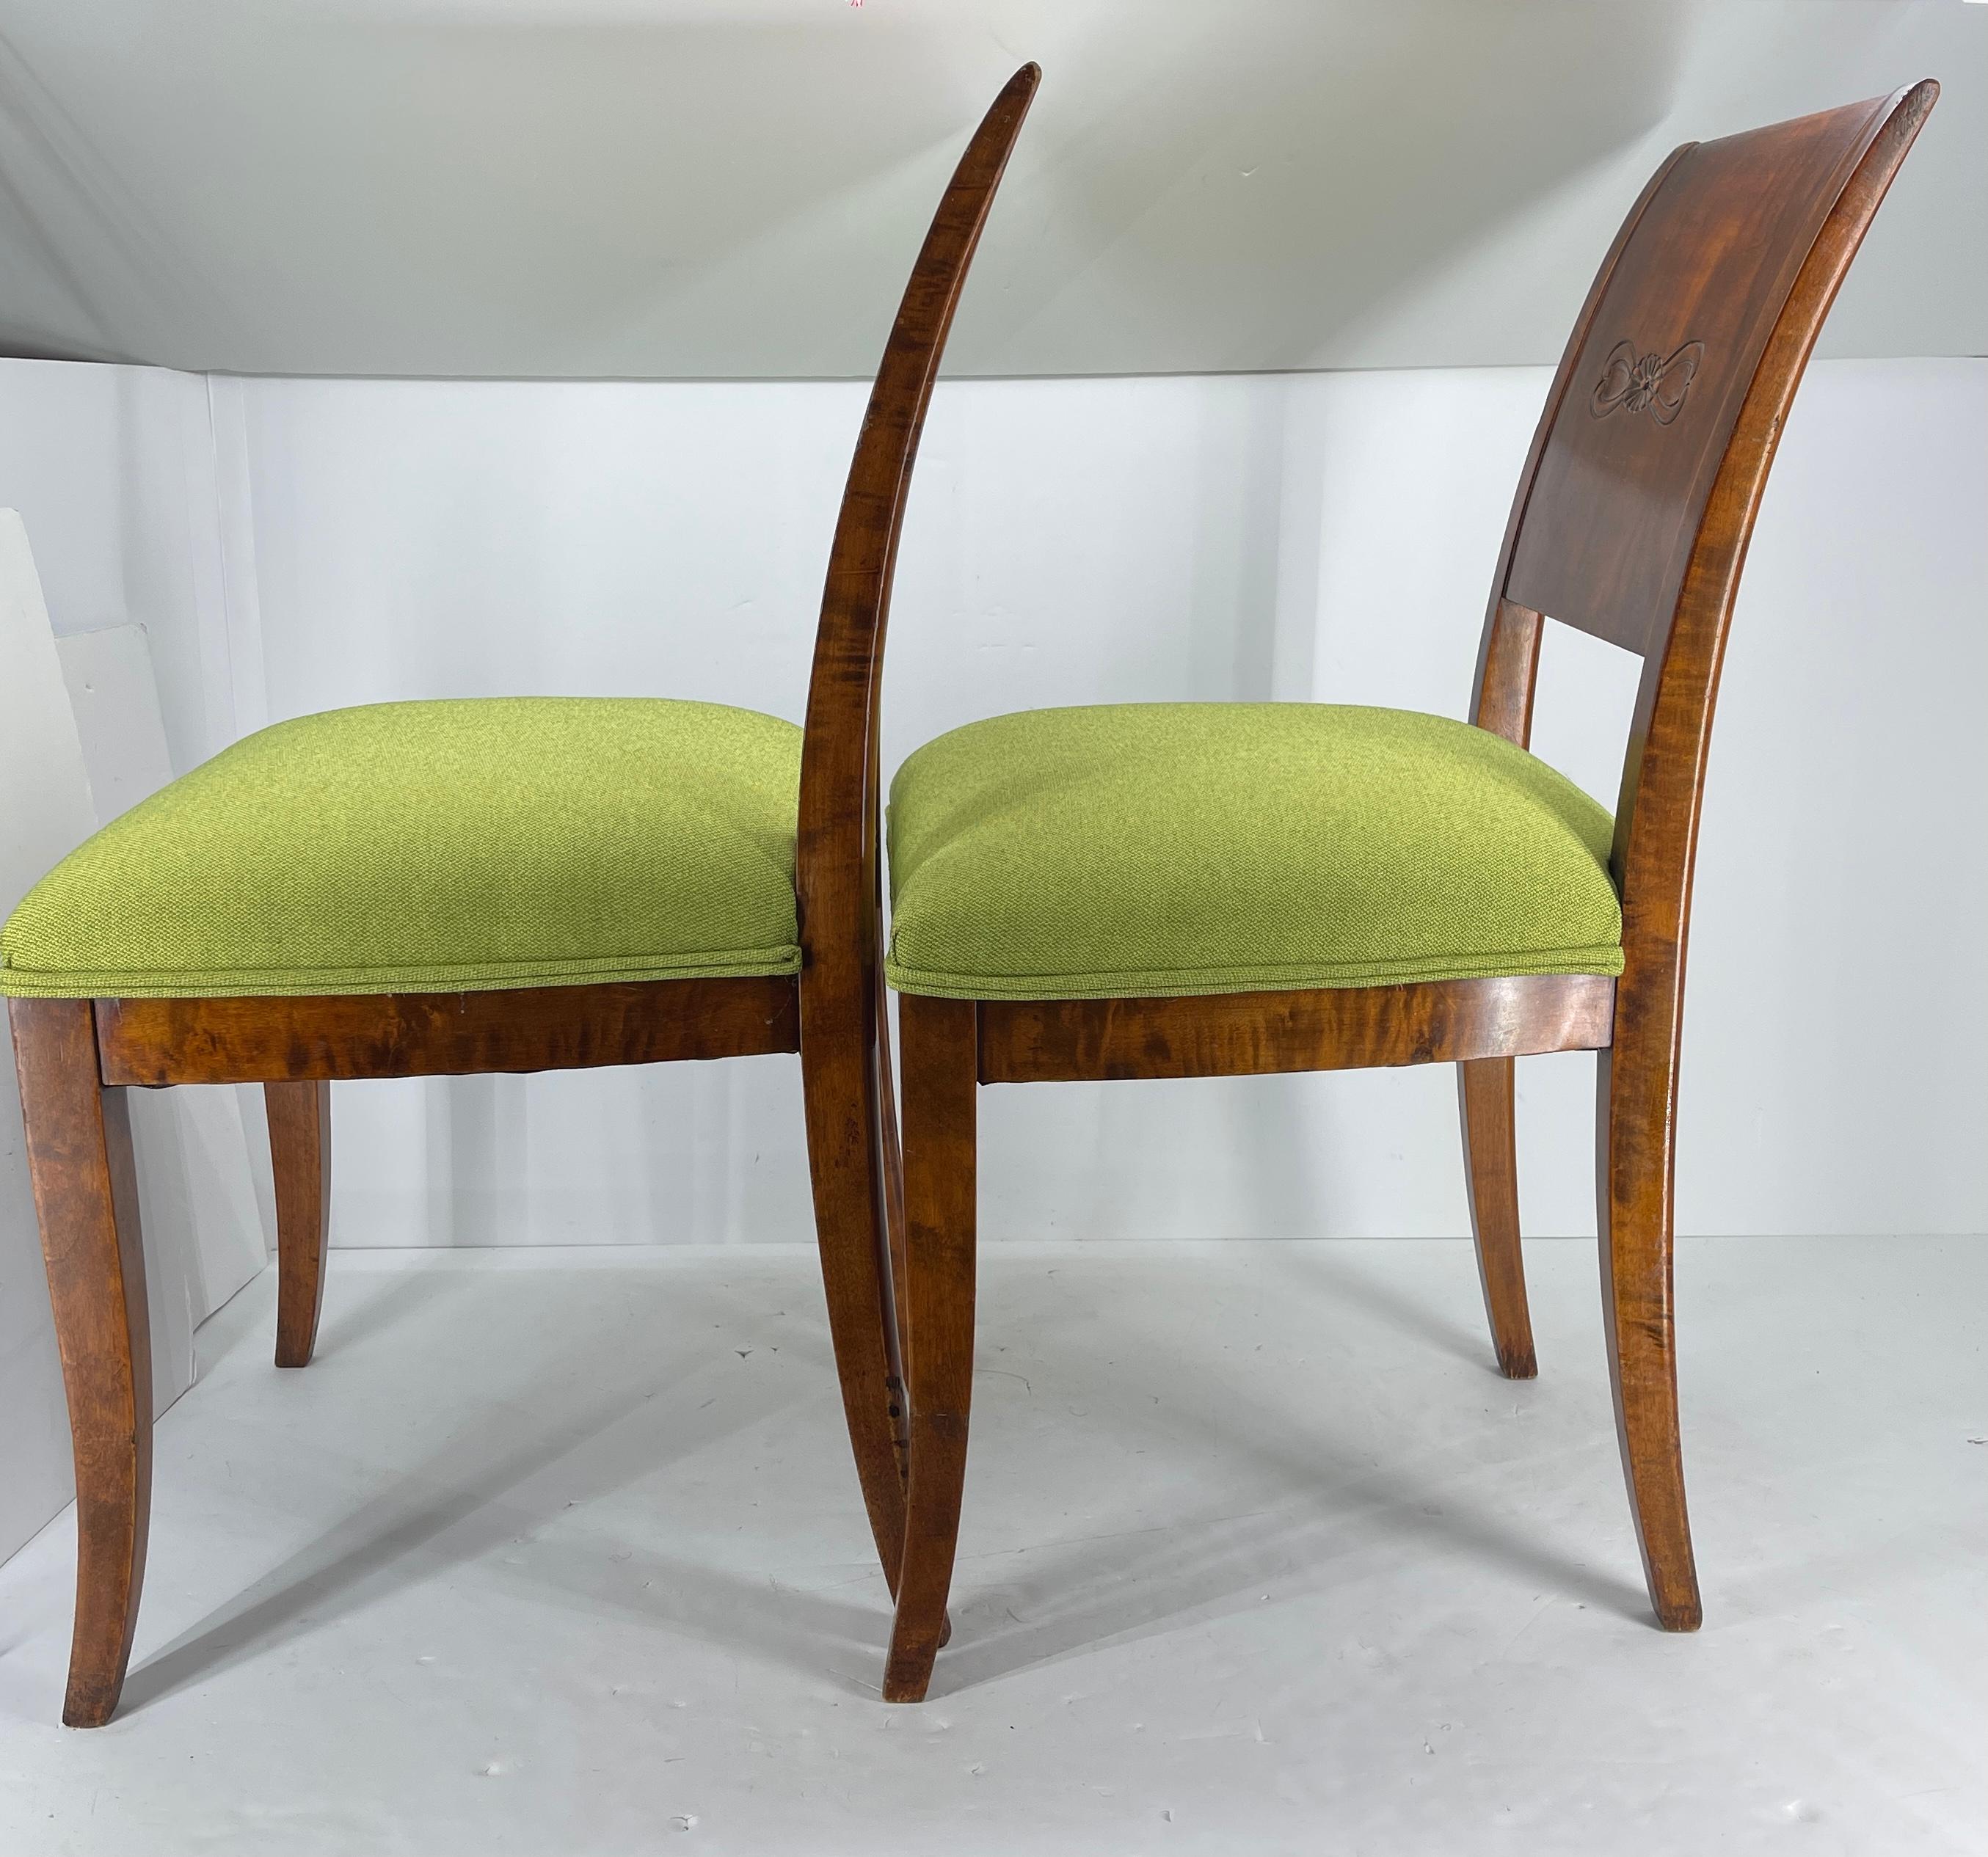 Upholstery Pair of Danish Biedermeier Grass Green Upholstered Side Chairs For Sale